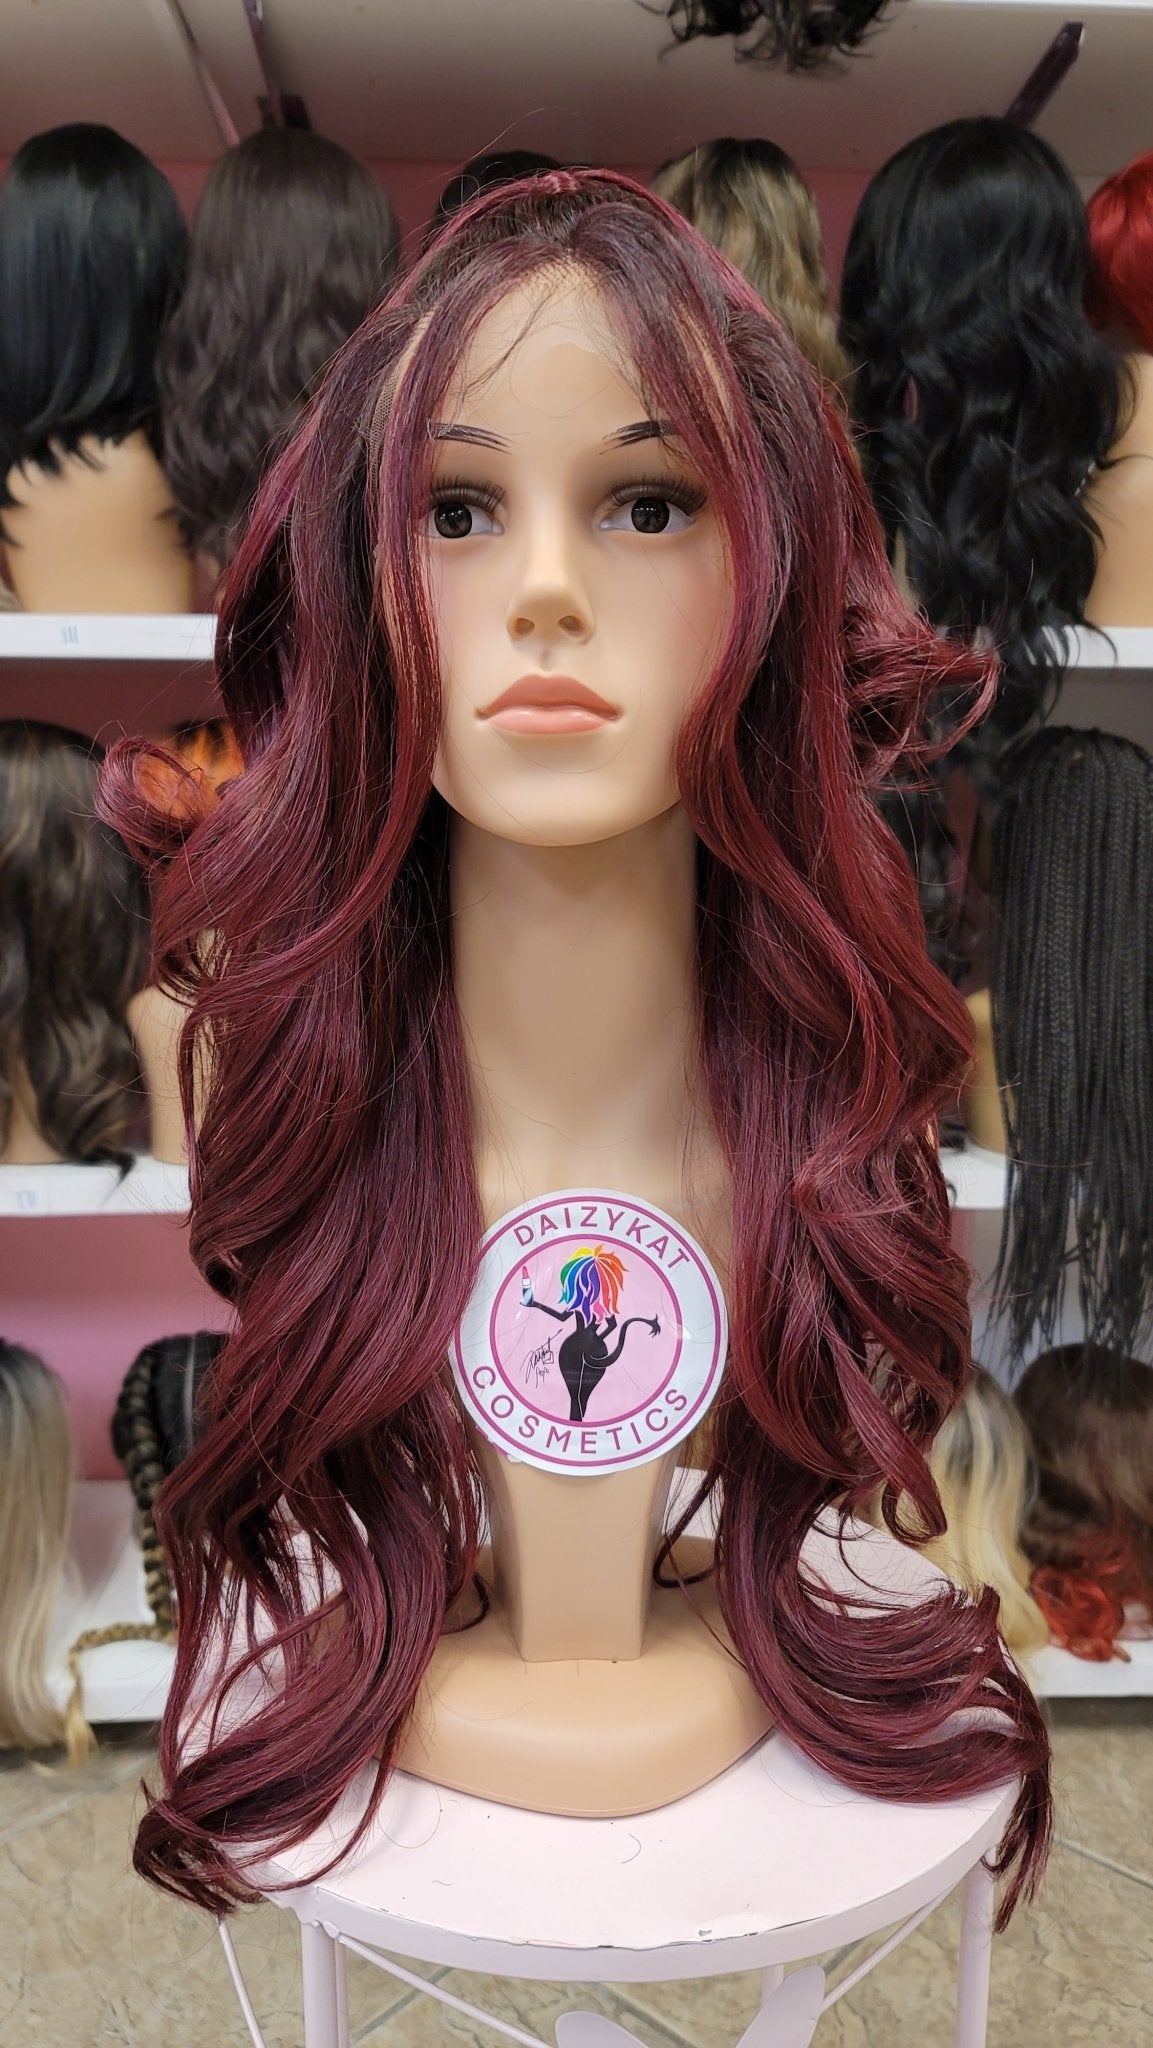 355 KEKE - 13x2 & 360 Top Pony Lace Front Wig - BLK.CHERRY - DaizyKat Cosmetics 355 KEKE - 13x2 & 360 Top Pony Lace Front Wig - BLK.CHERRY DaizyKat Cosmetics WIGS